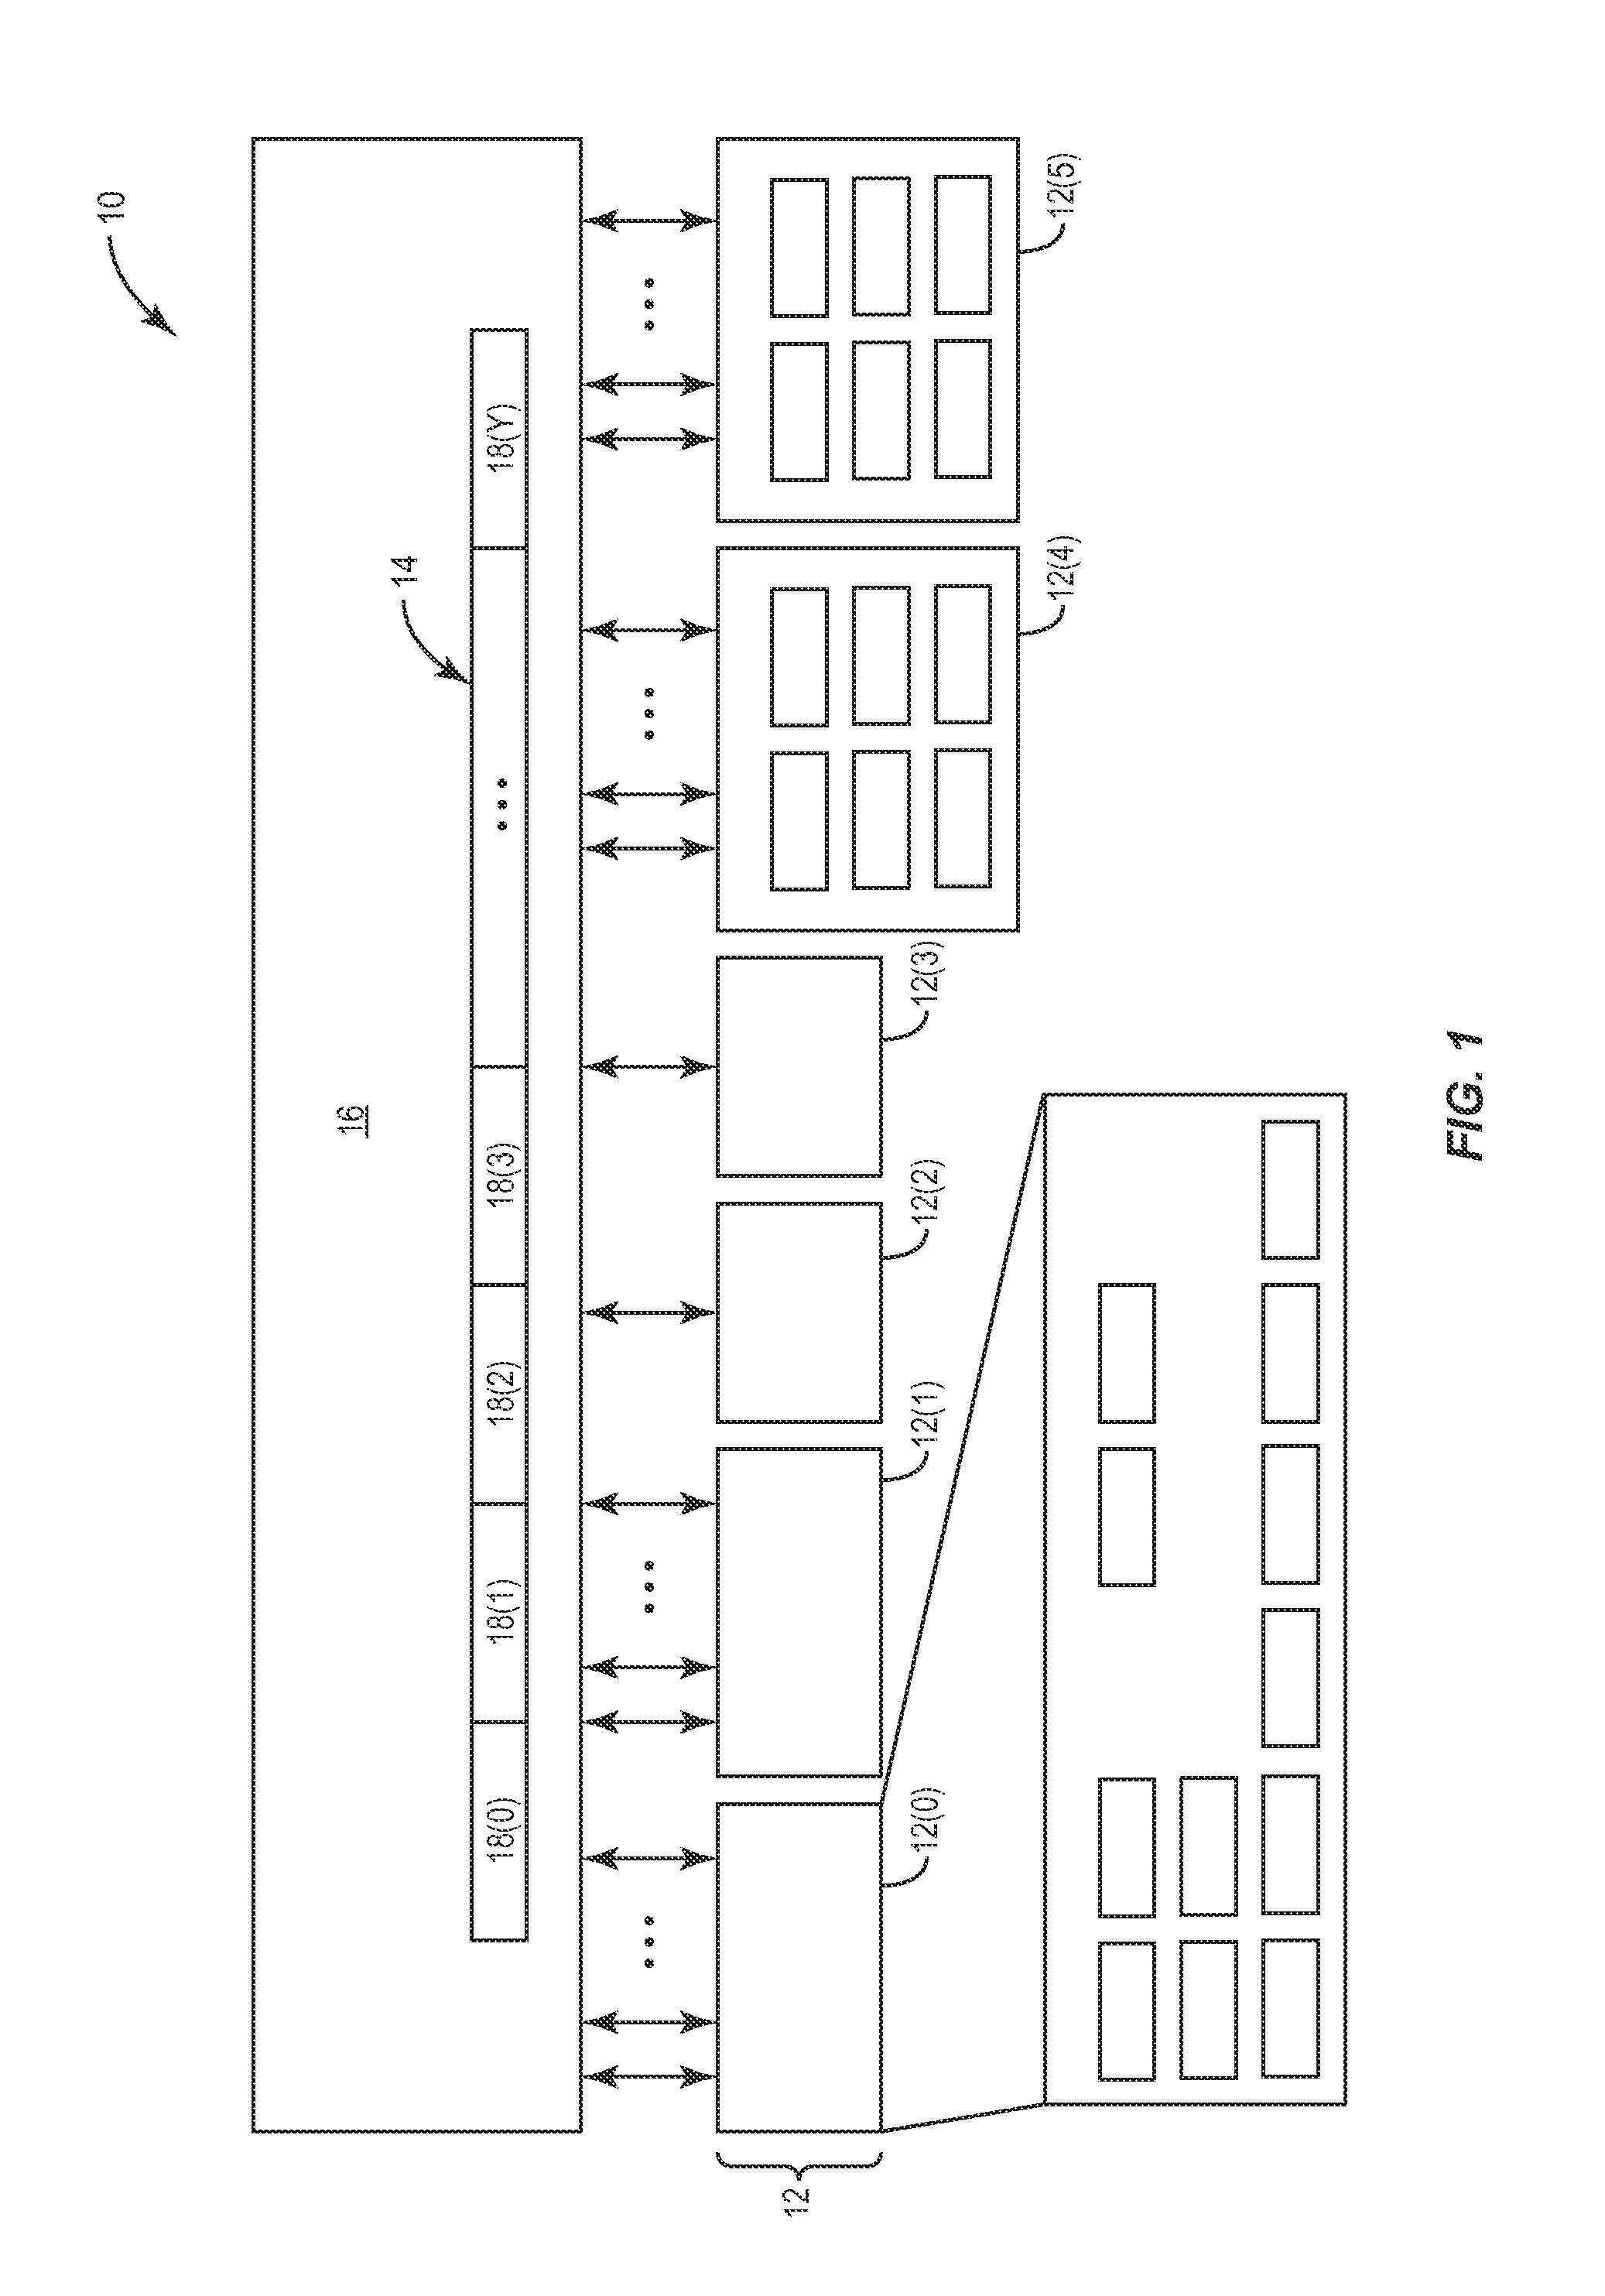 Vector processing engines having programmable data path configurations for providing multi-mode radix-2x butterfly vector processing circuits, and related vector processors, systems, and methods